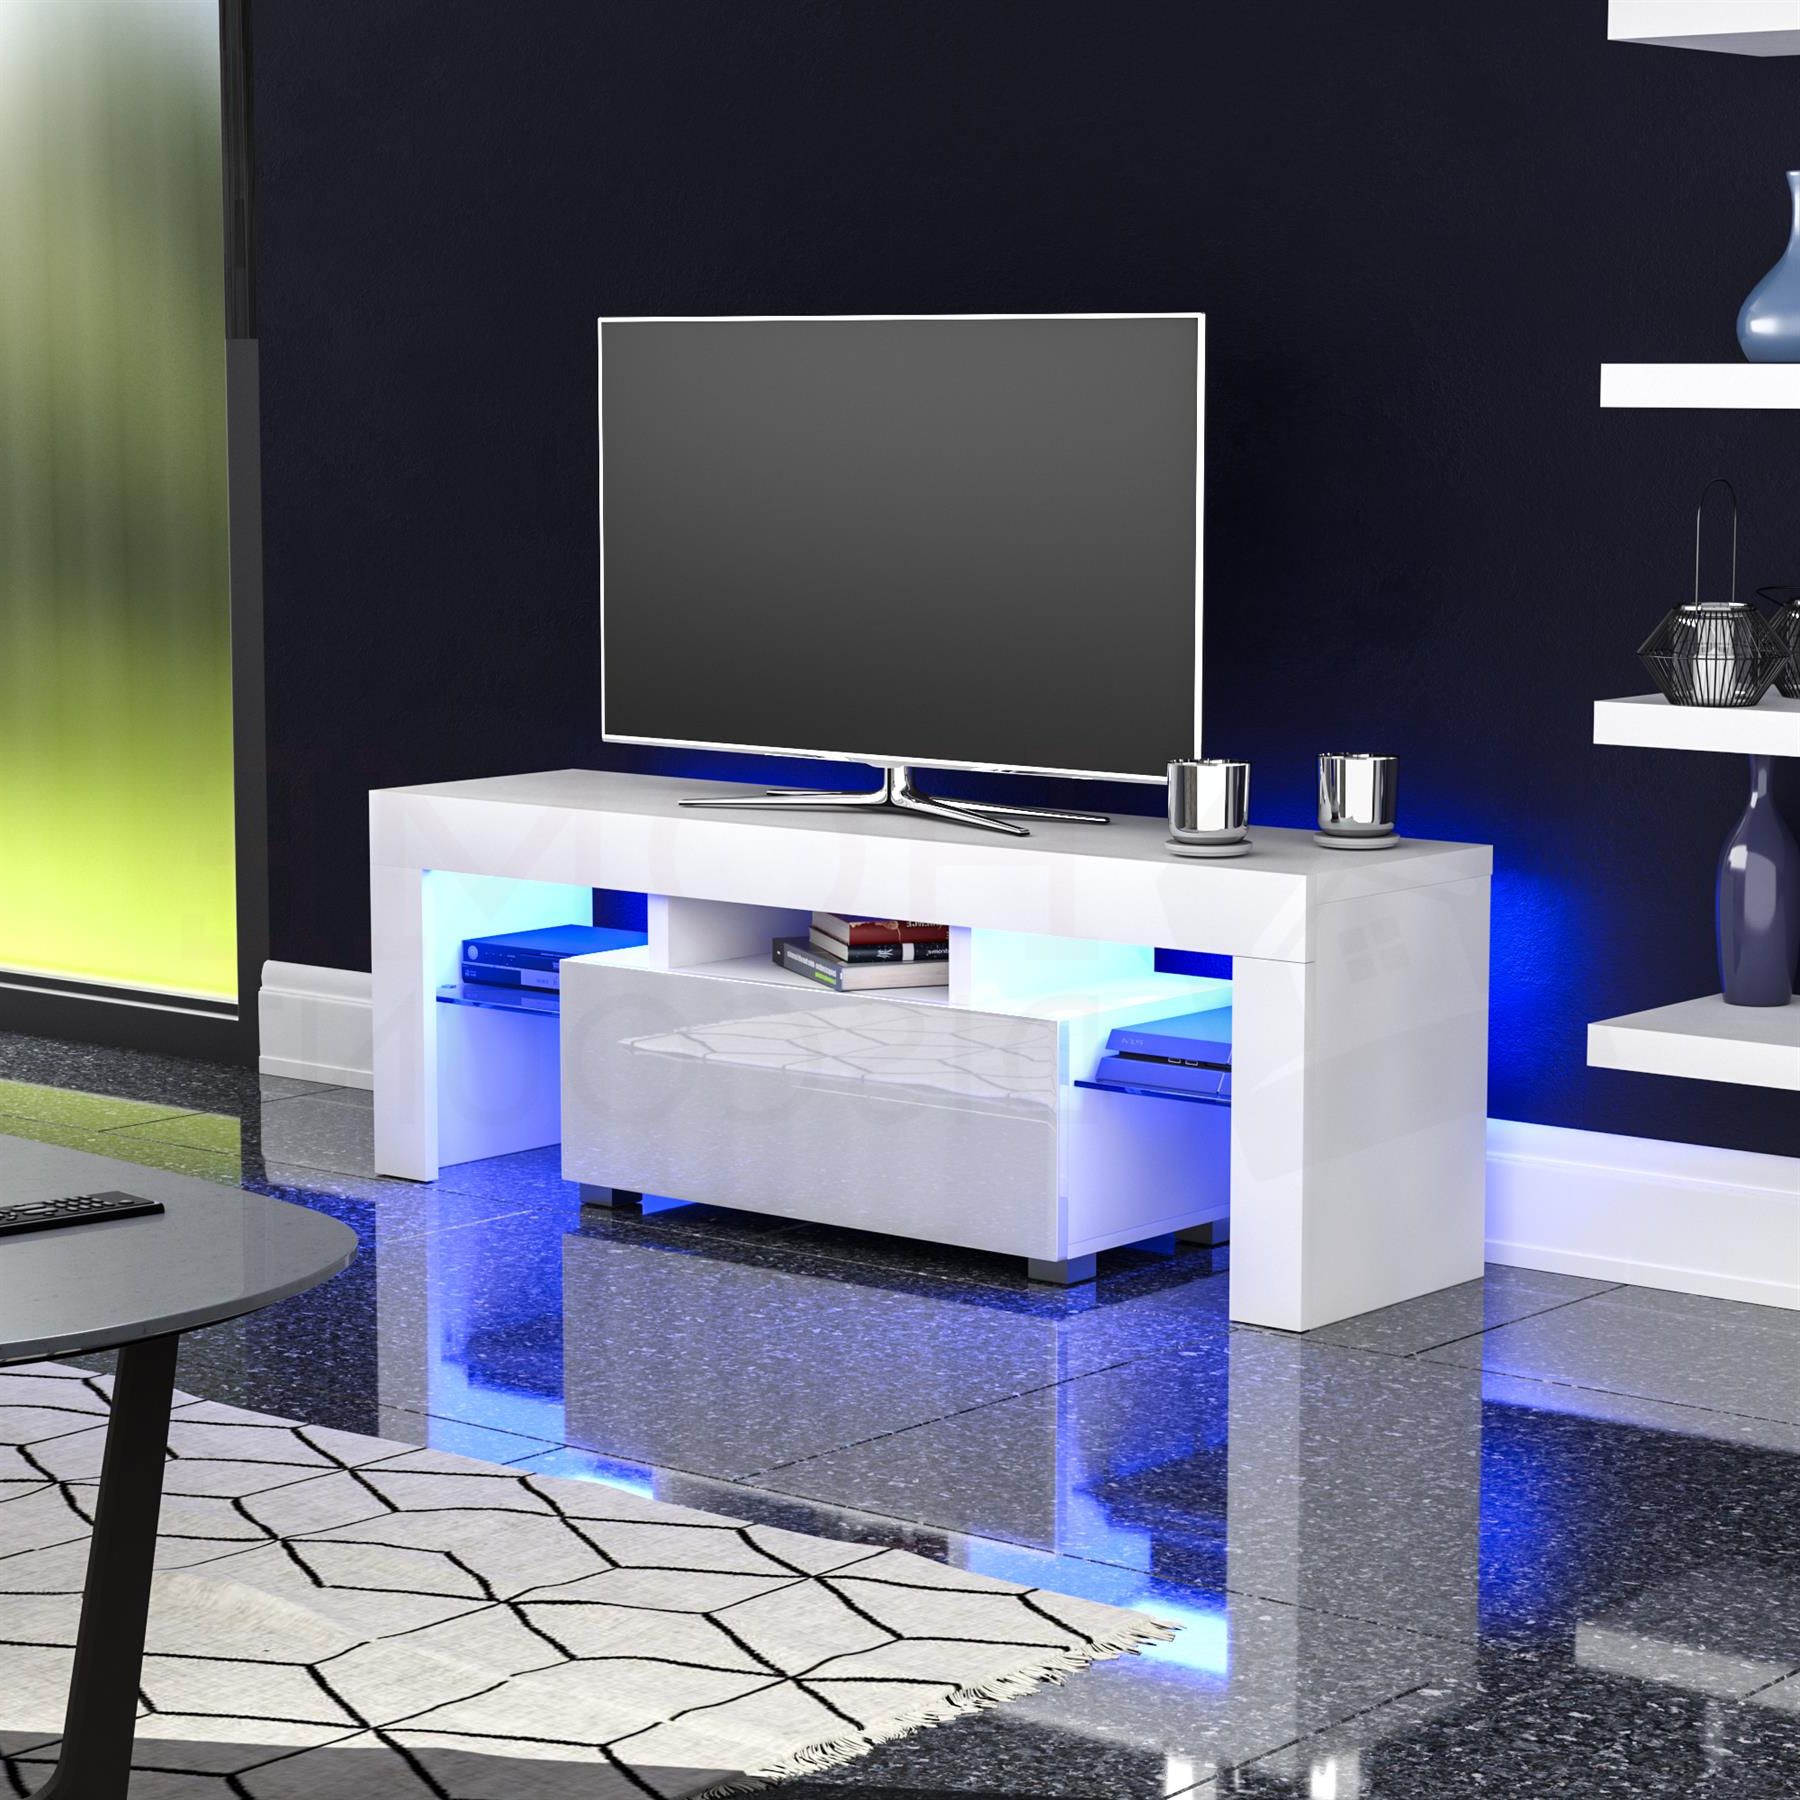 Luna Led Tv Stand Cabinet Unit 1 Drawer Modern Regarding Zimtown Modern Tv Stands High Gloss Media Console Cabinet With Led Shelf And Drawers (View 3 of 20)